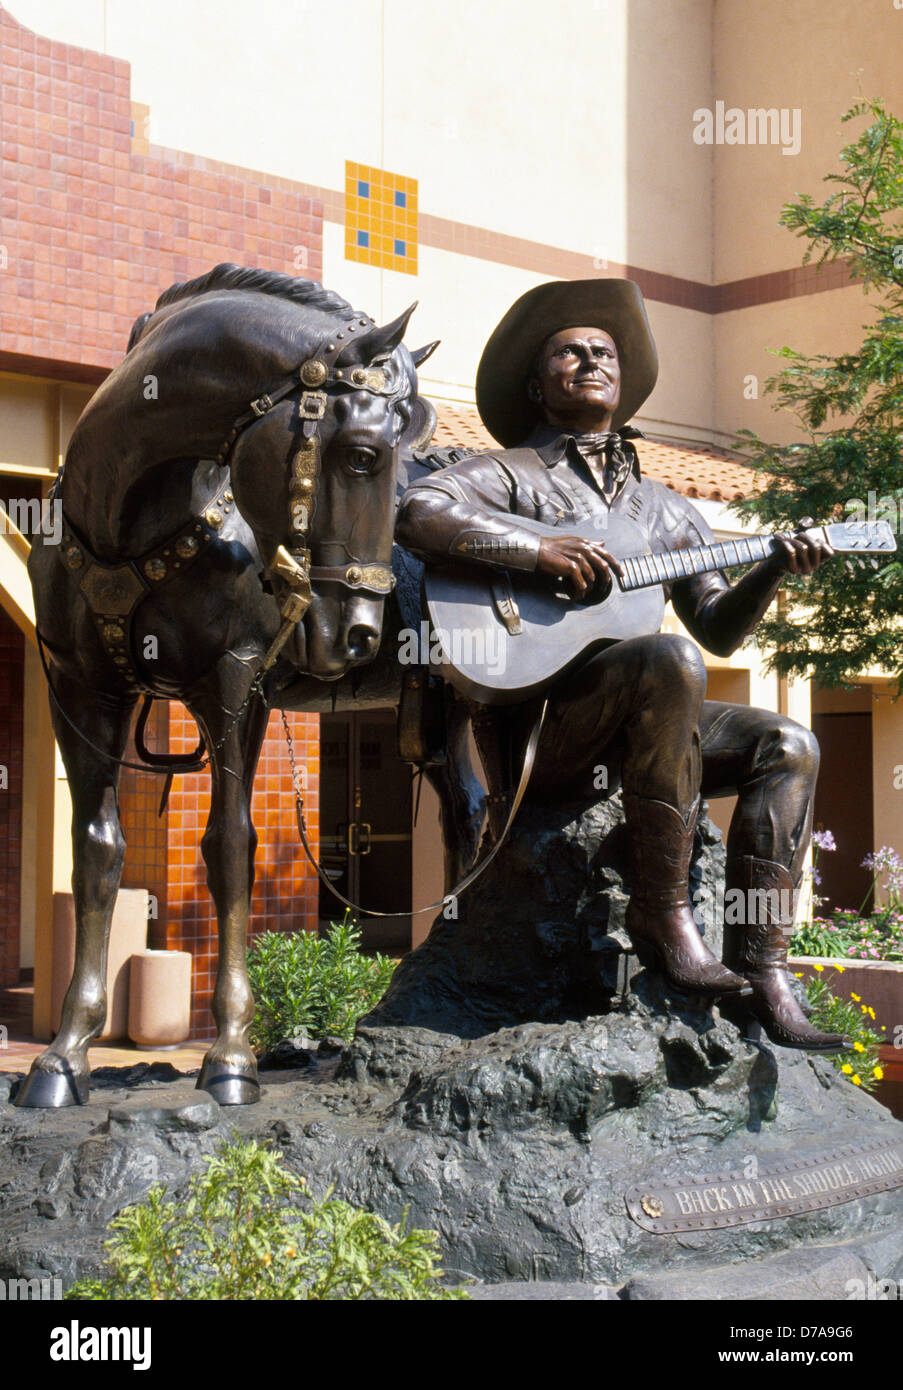 A bronze sculpture of actor/singer Gene Autry and his horse is displayed at the Autry Museum of the American West in Los Angeles, California, USA. Stock Photo